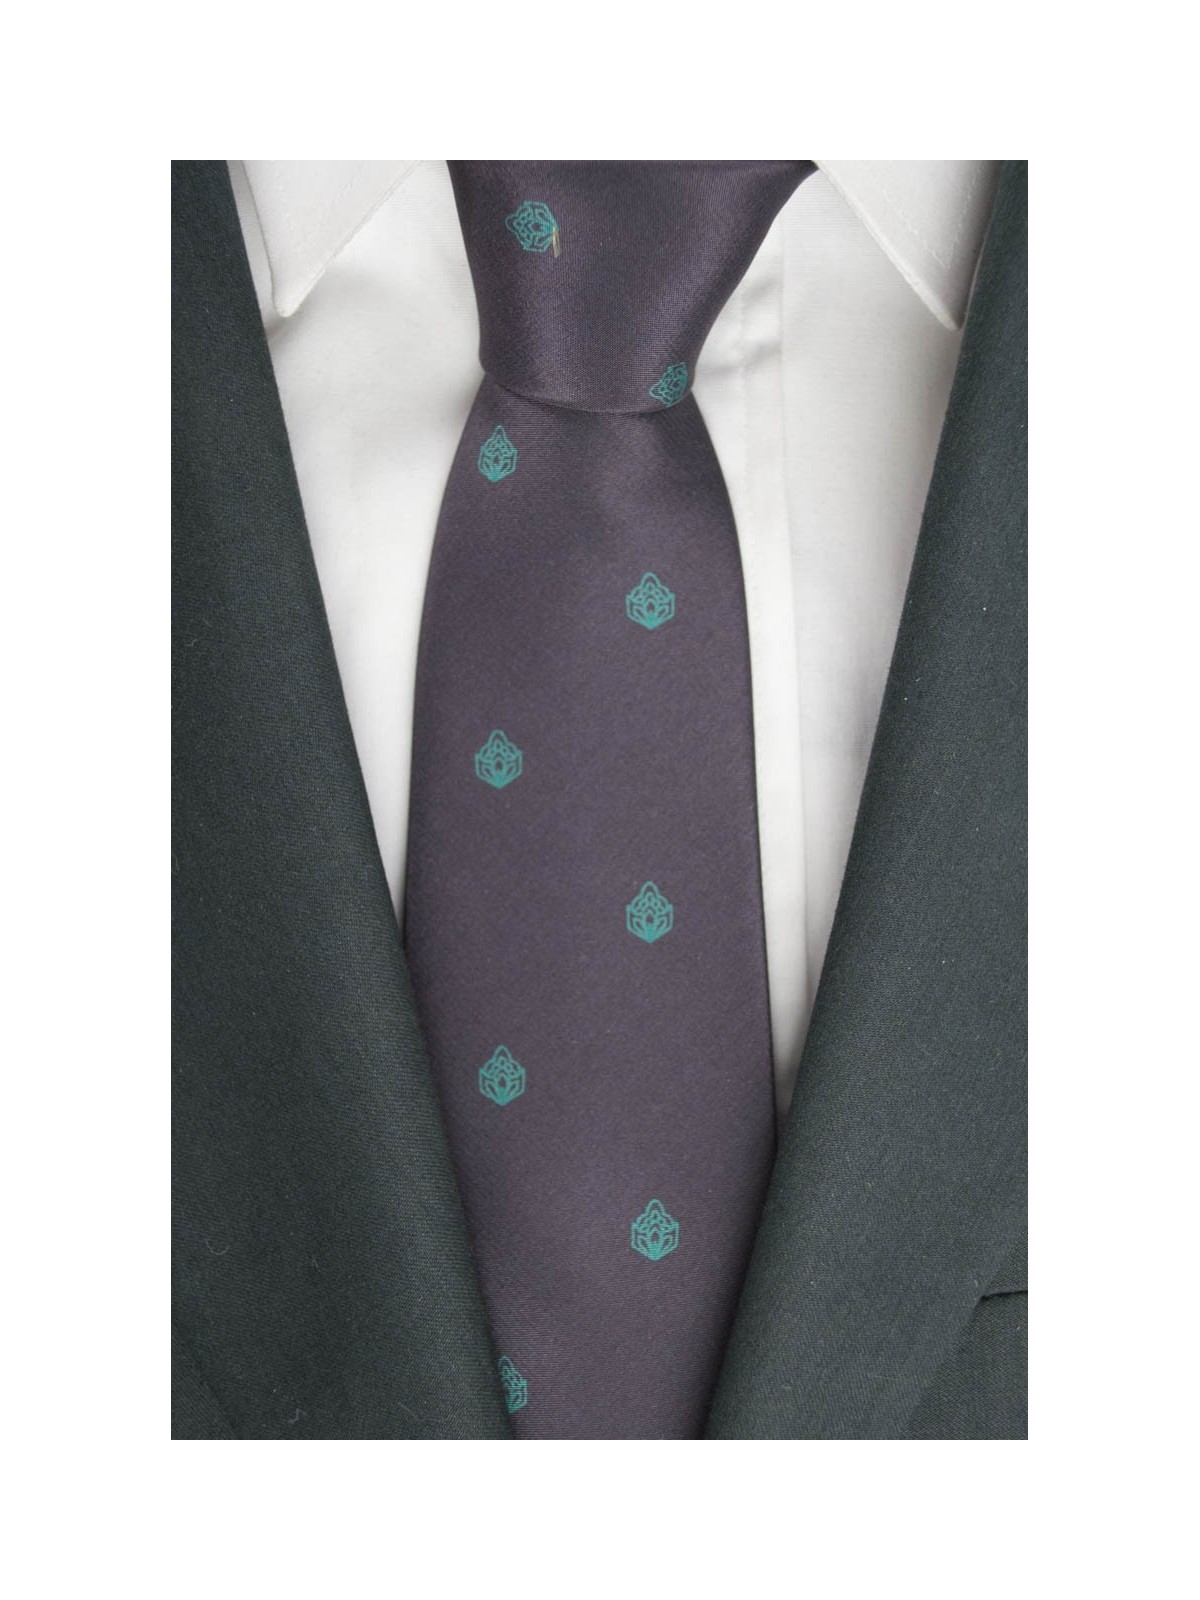 Tie Plum Small Designs Turquoise - 100% Pure Silk - Made in Italy